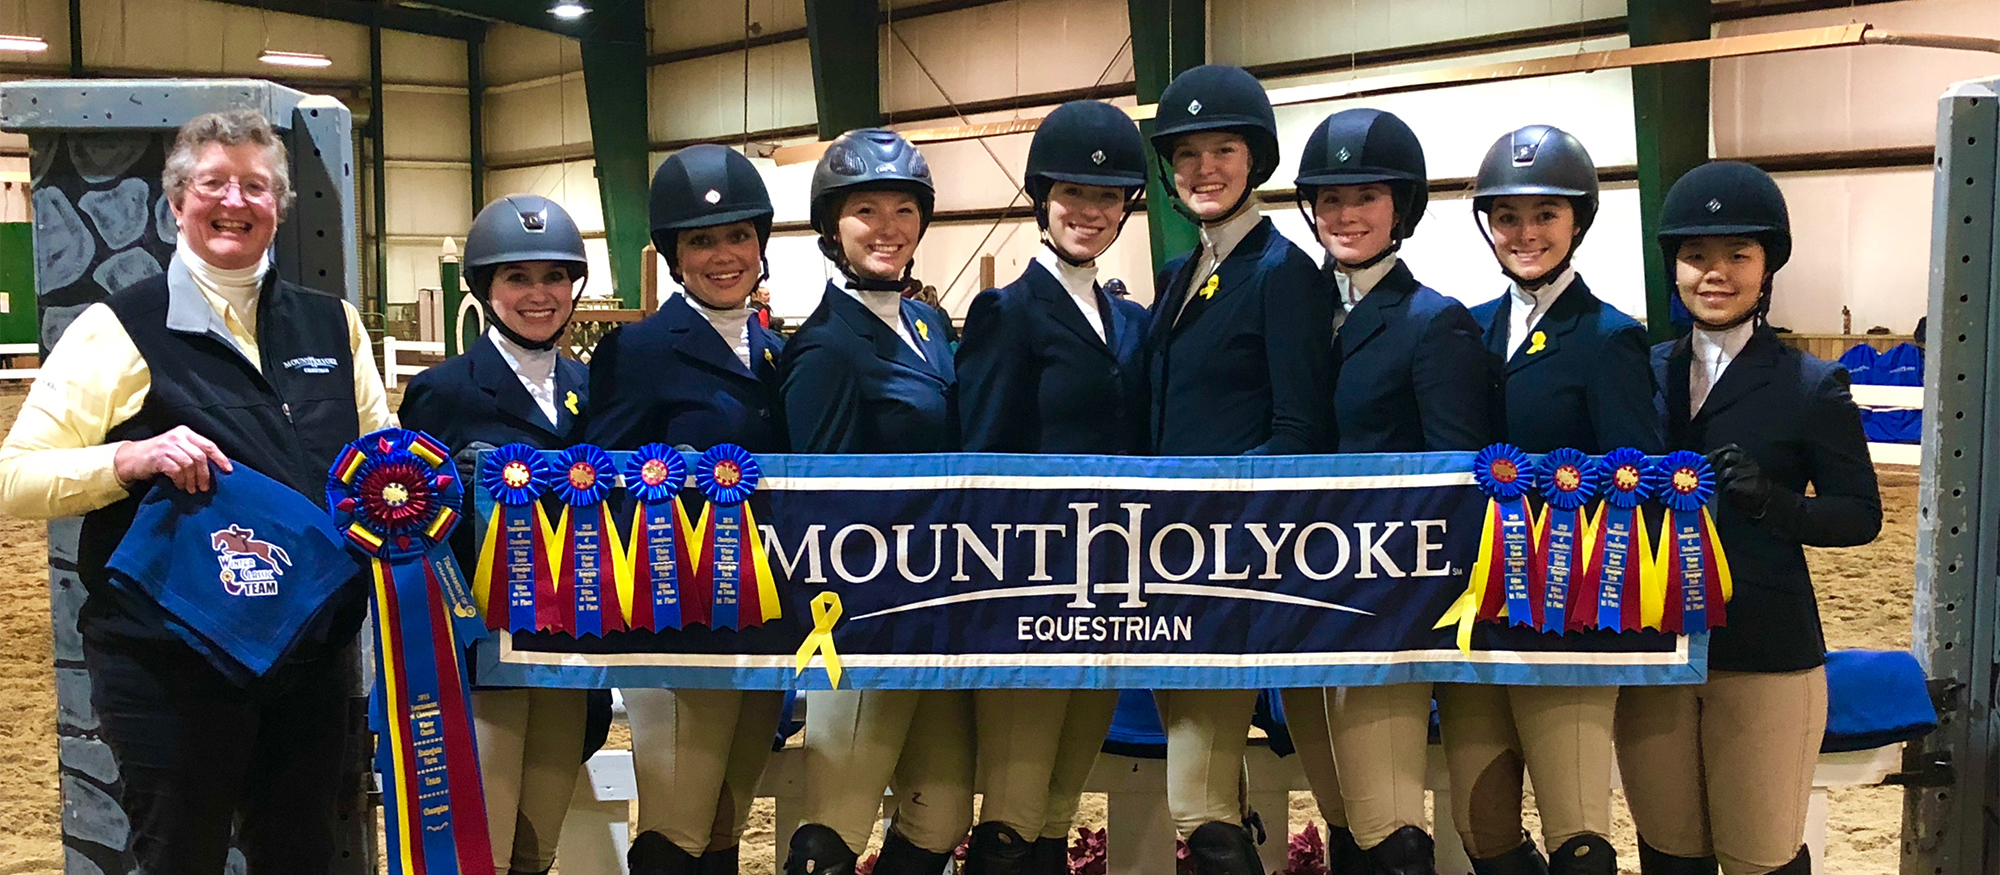 Photo of the Lyons riding team after winning the 2018 Winter I Tournament of Champions event at the Stonegate Farm on January 20, 2018.